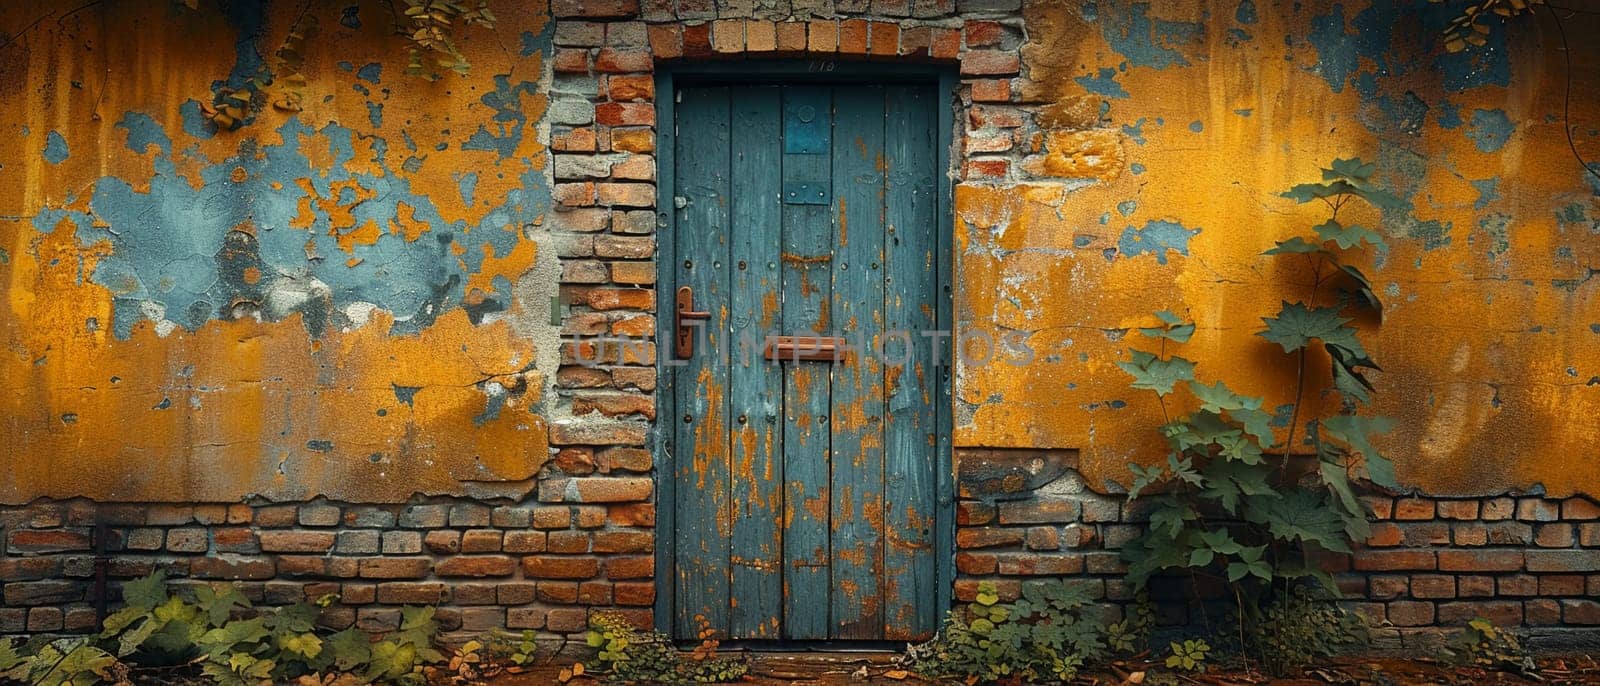 A weathered wooden door in a historic building, evoking stories of the past.